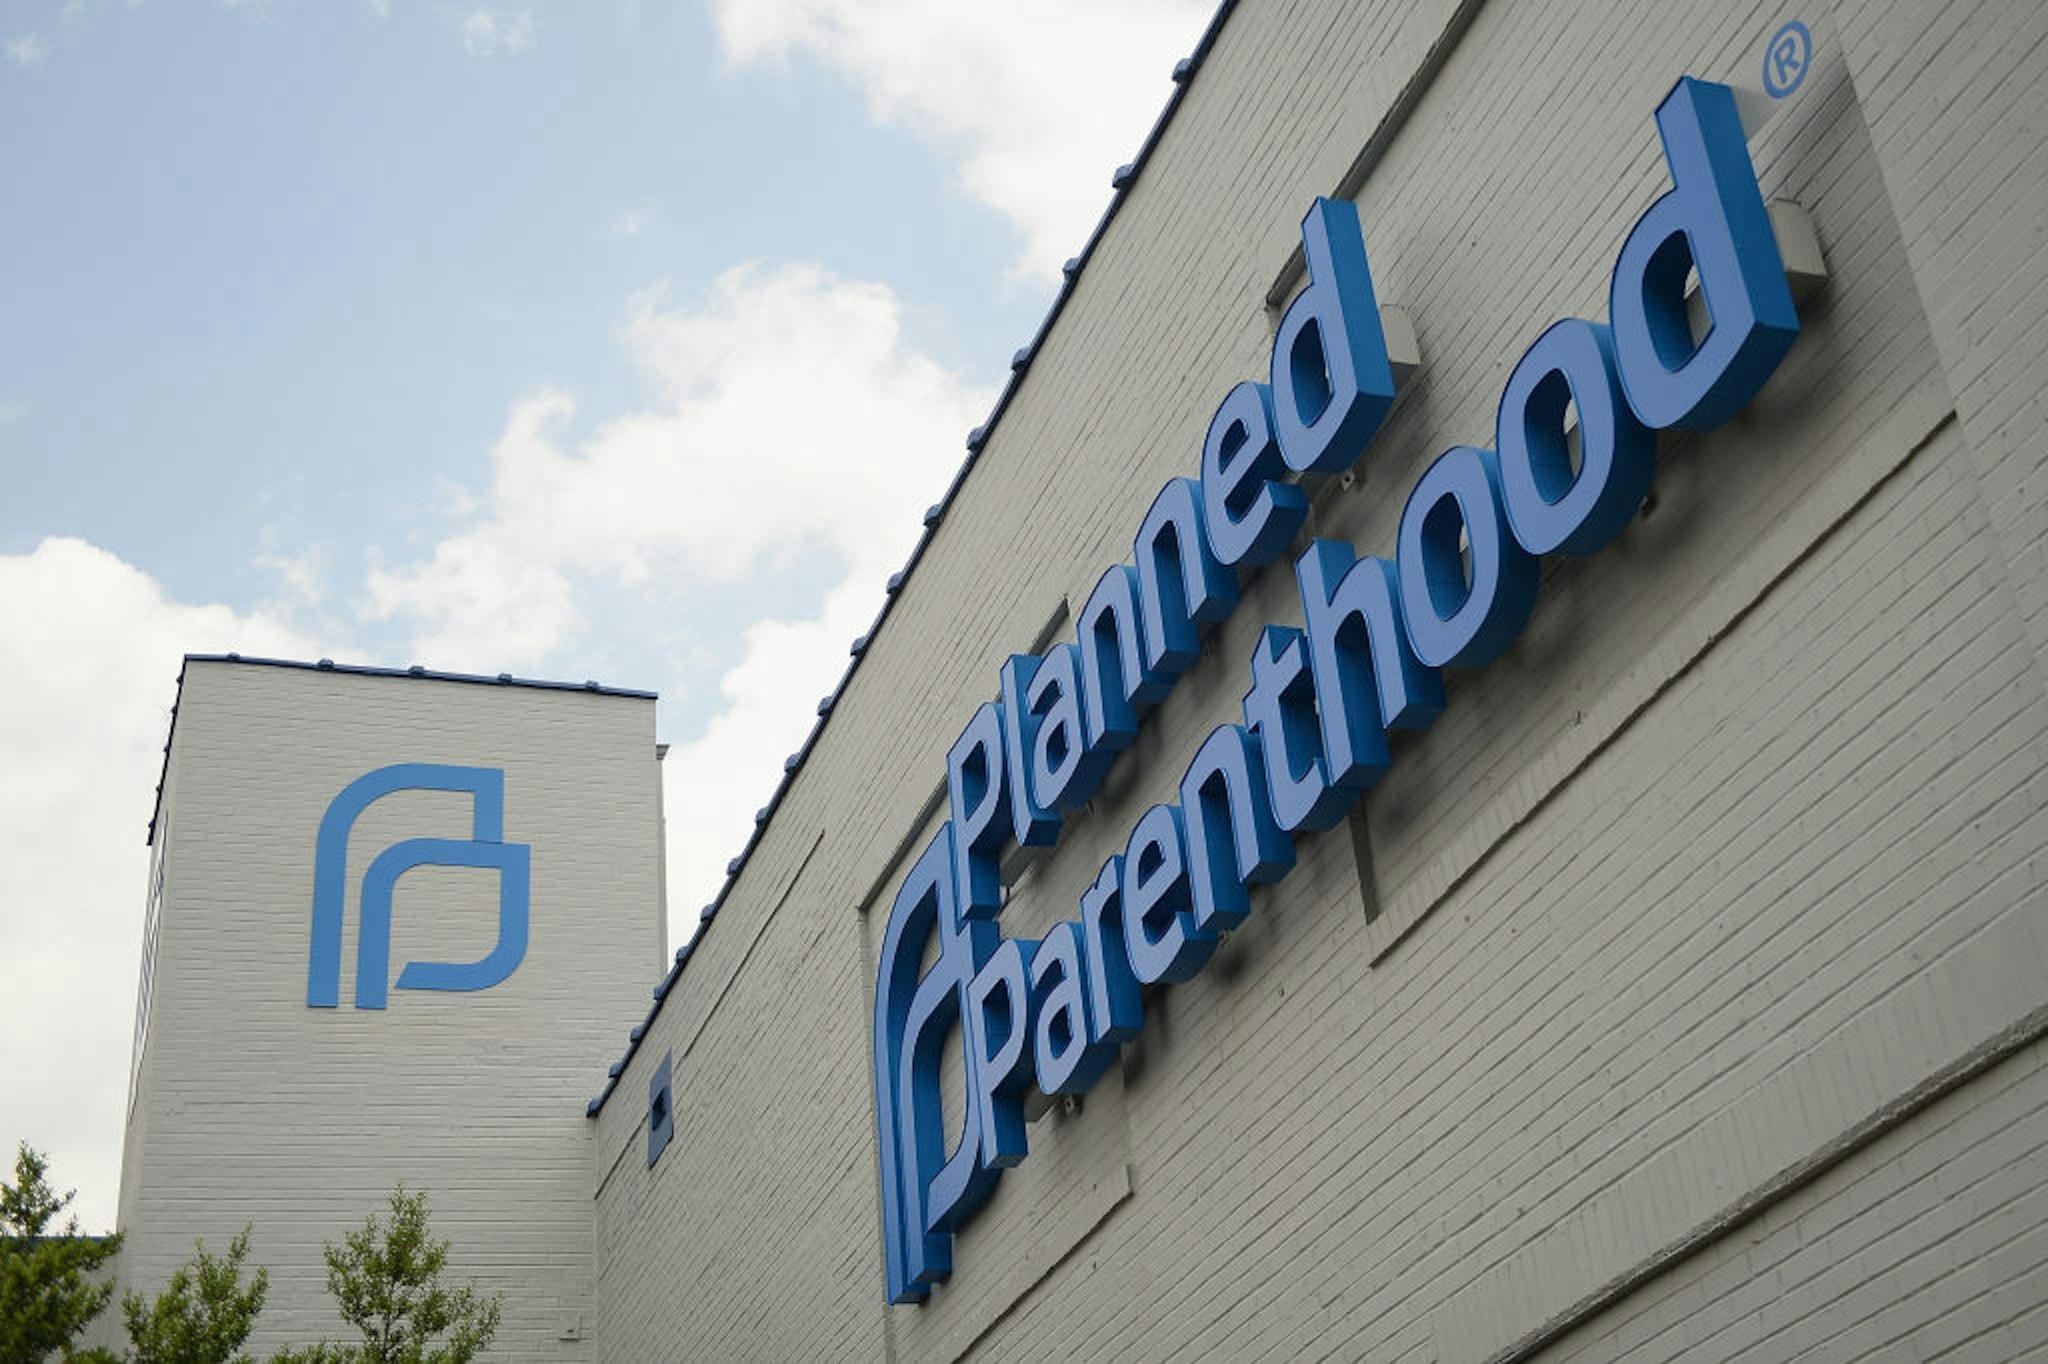 ST LOUIS, MO - MAY 28: The exterior of a Planned Parenthood Reproductive Health Services Center is seen on May 28, 2019 in St Louis, Missouri. In the wake of Missouri recent controversial abortion legislation, the states' last abortion clinic is being forced to close by the end of the week. Planned Parenthood is expected to go to court to try and stop the closing.